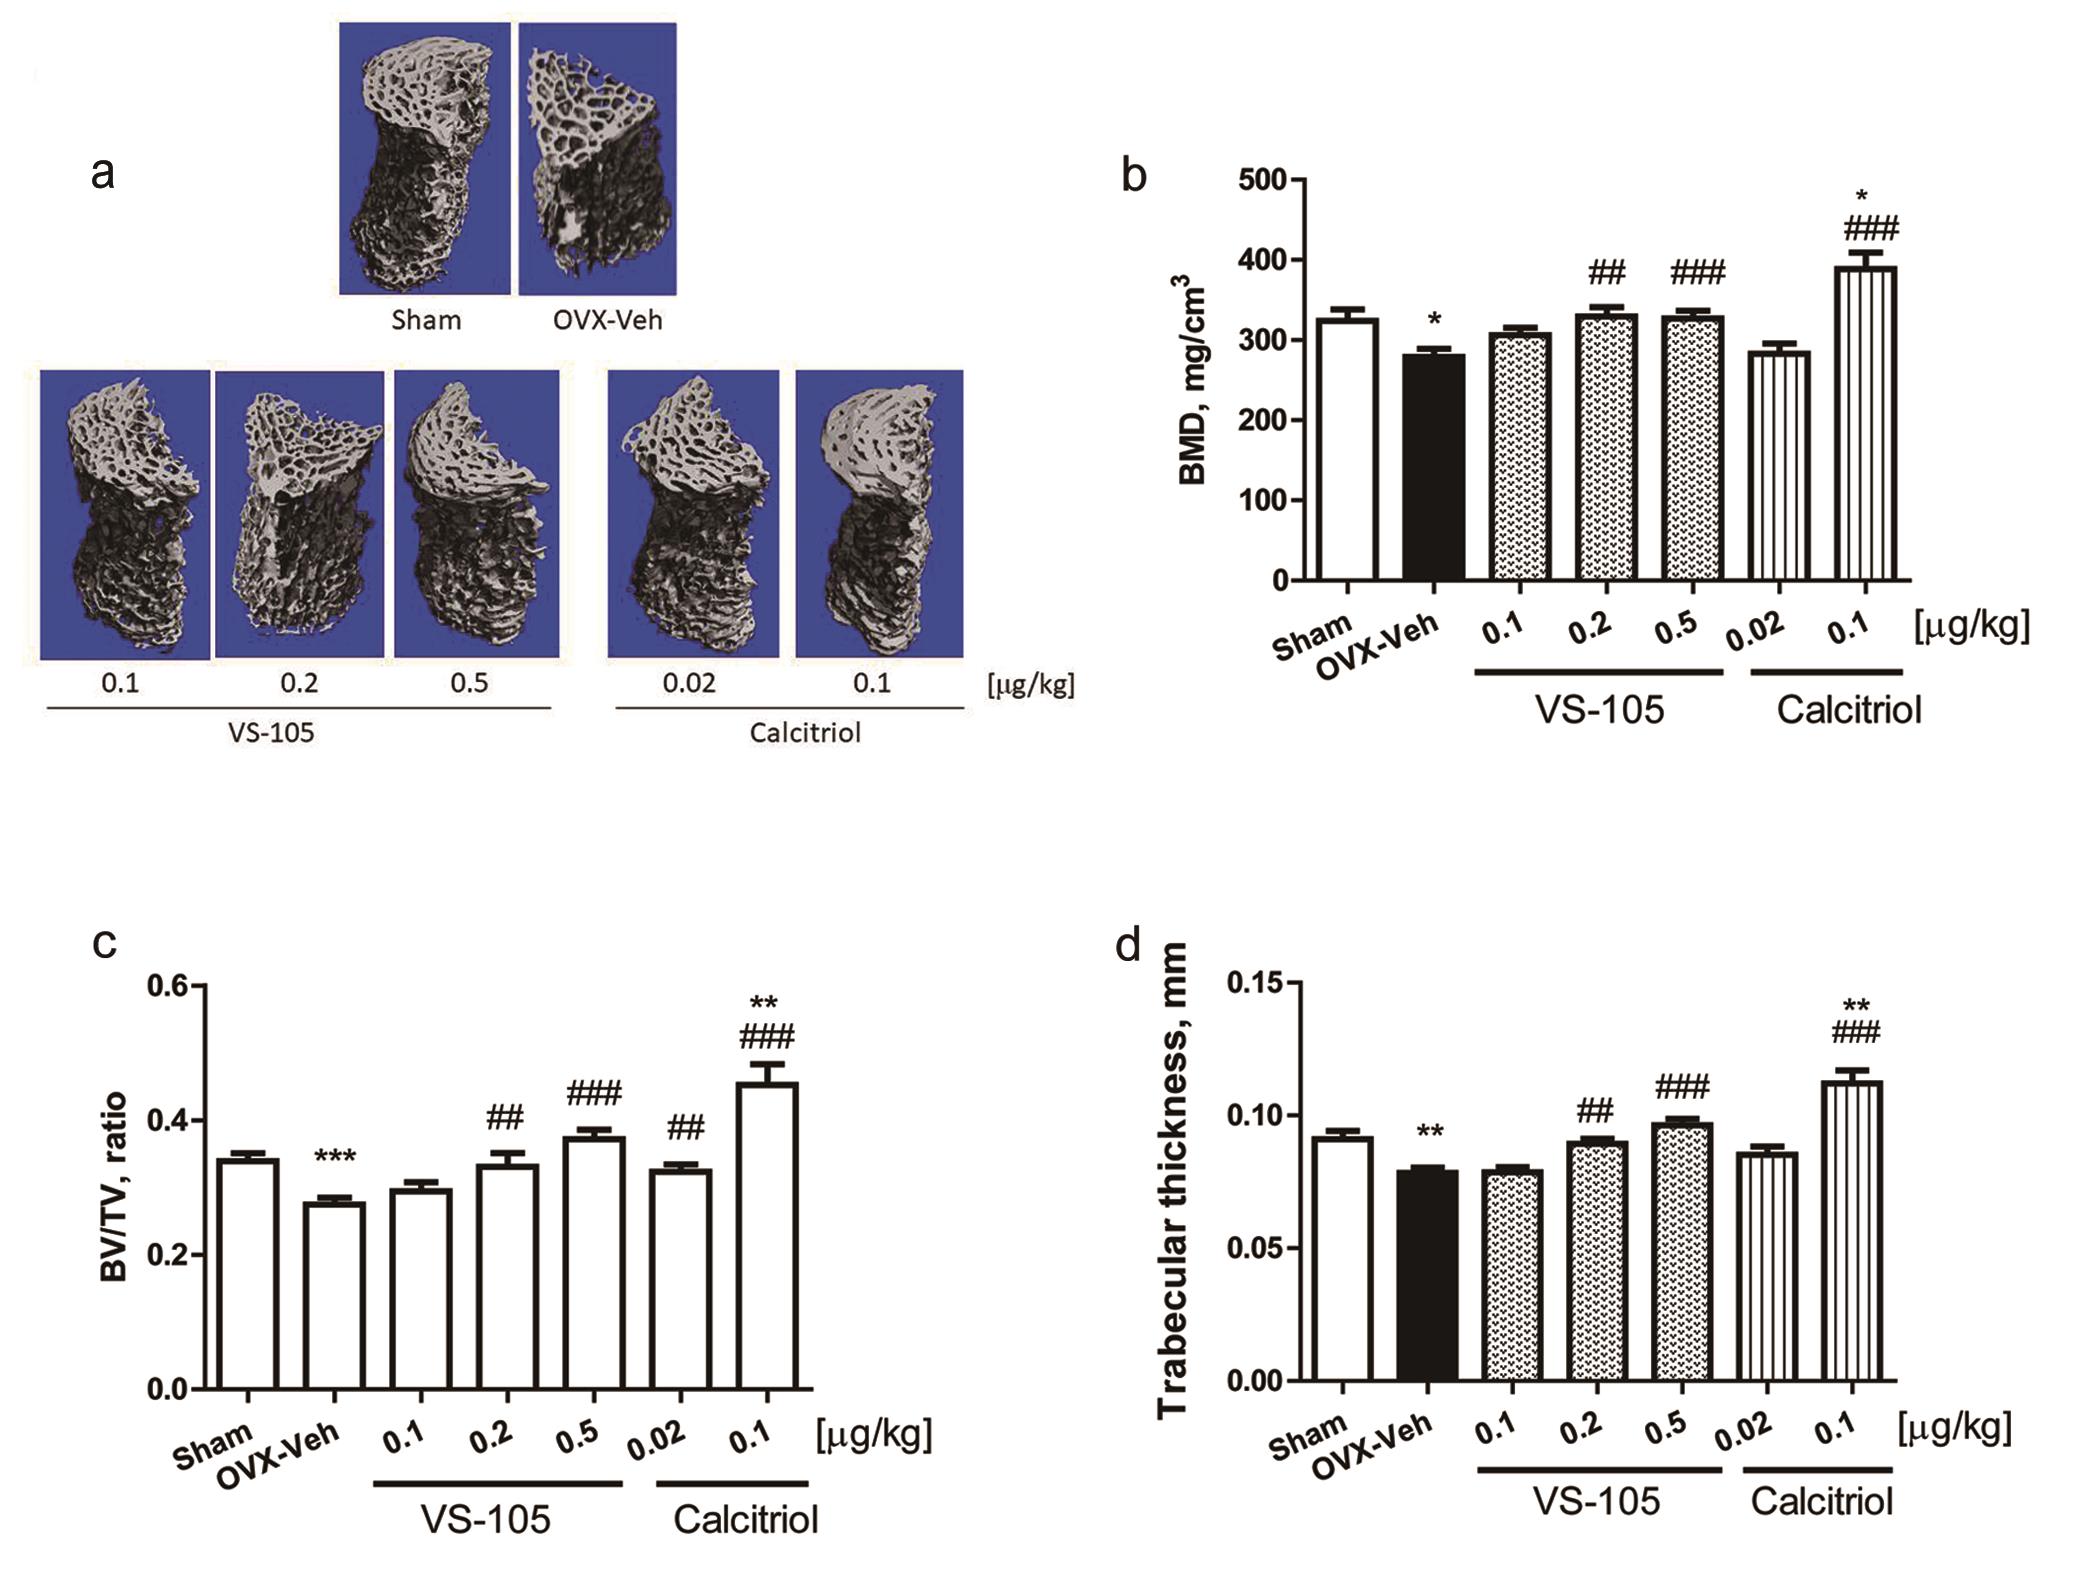 Effects of VS-105 and calcitriol on L3 lumbar vertebra parameters in OVX rats.